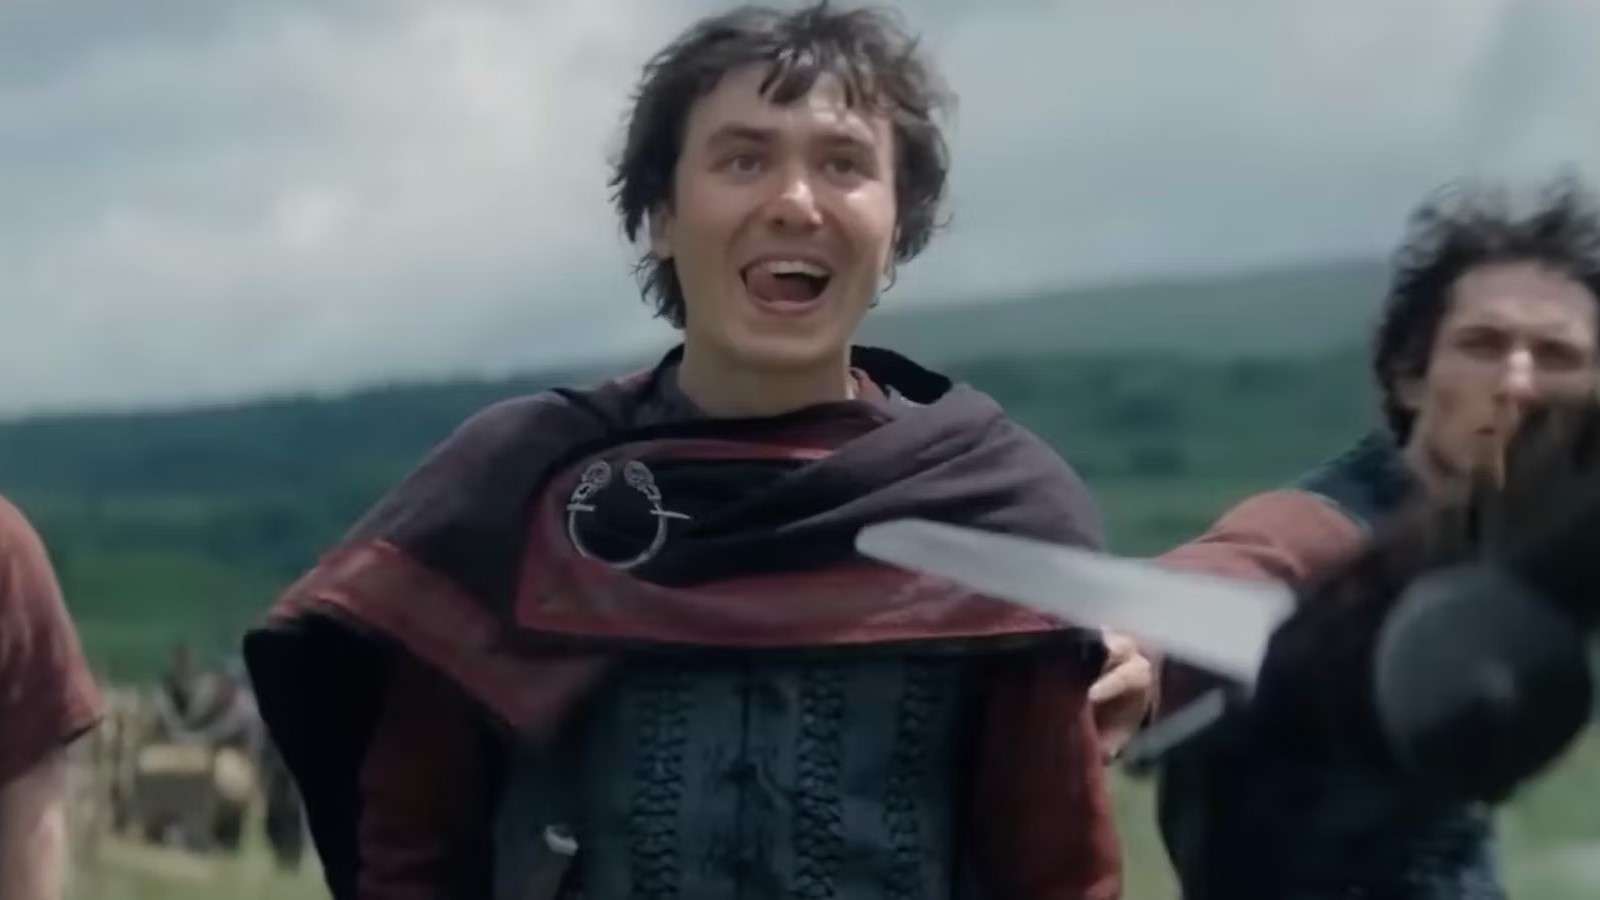 Samwell Blackwood in House of the Dragon, sticking his tongue out as someone holds a sword to his chest